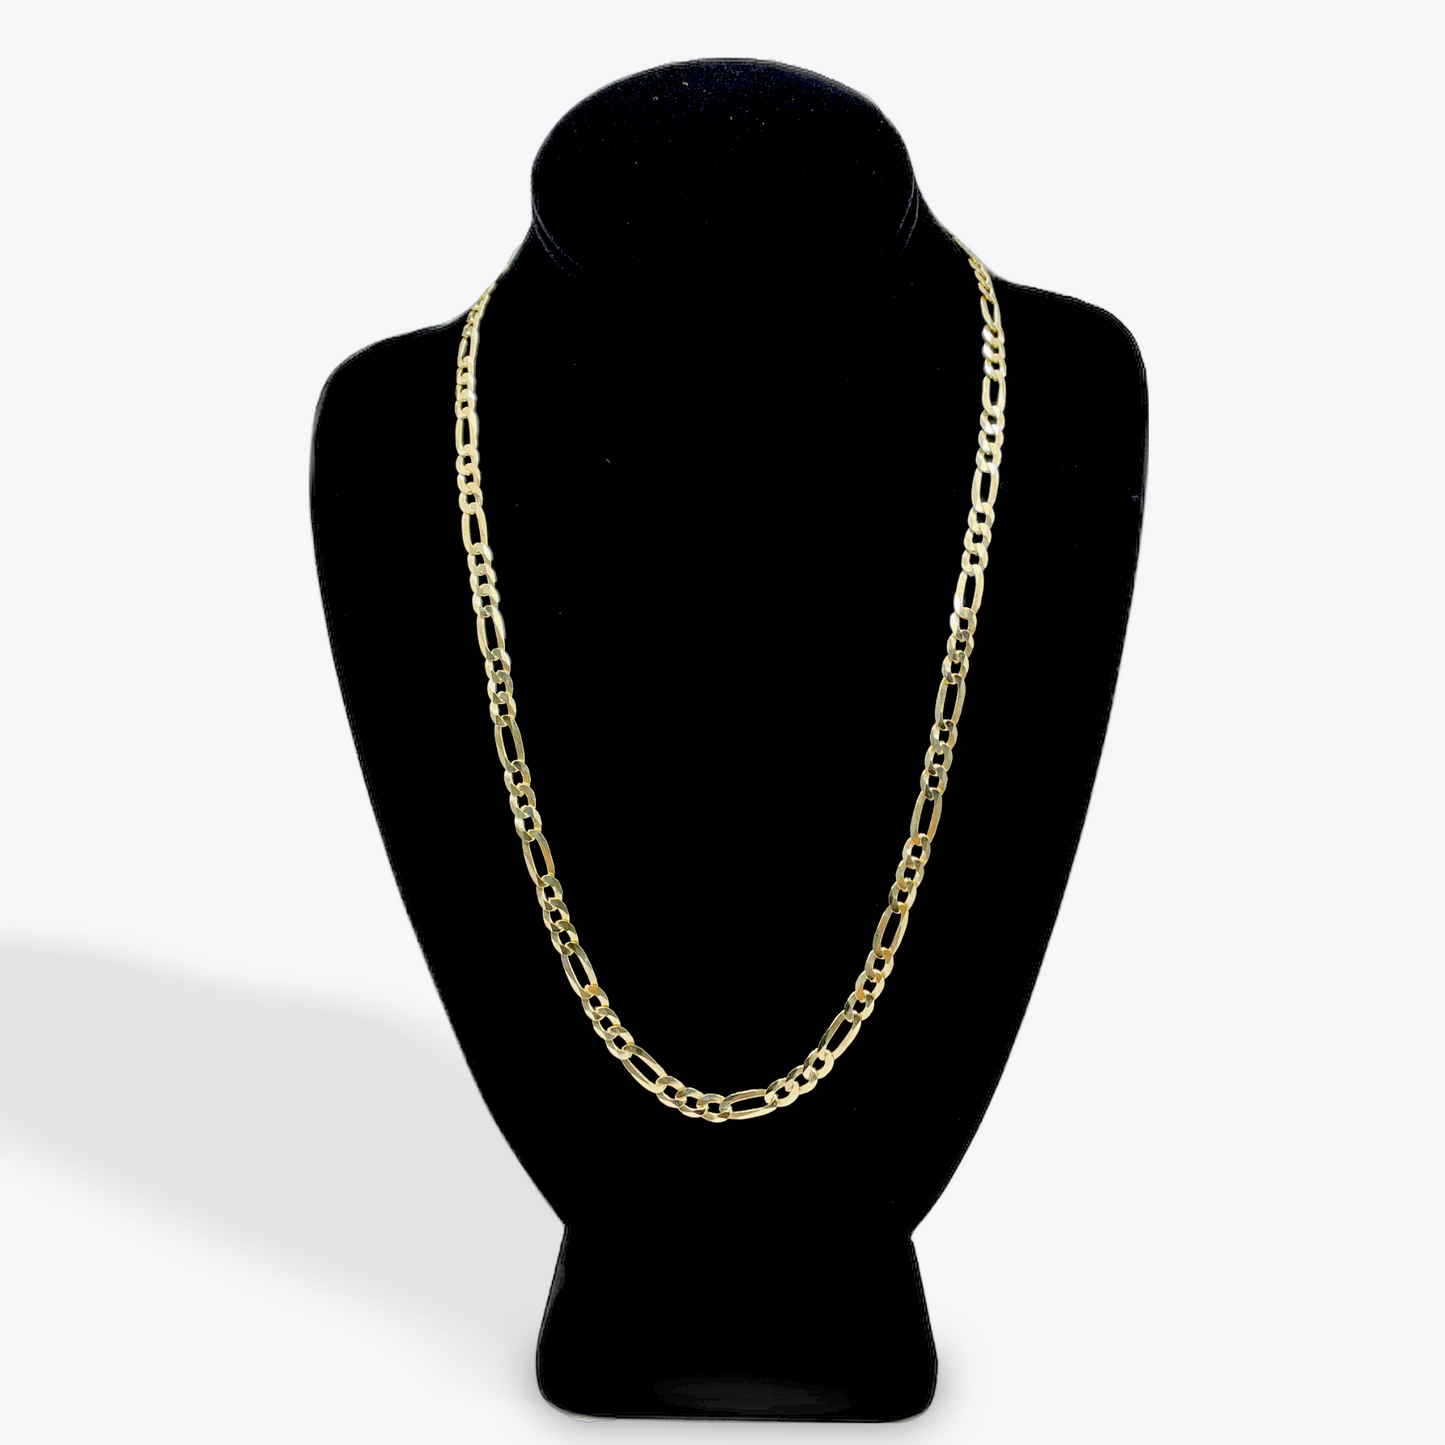 925 Silver Figaro Chain Gold Plated - 22 inch